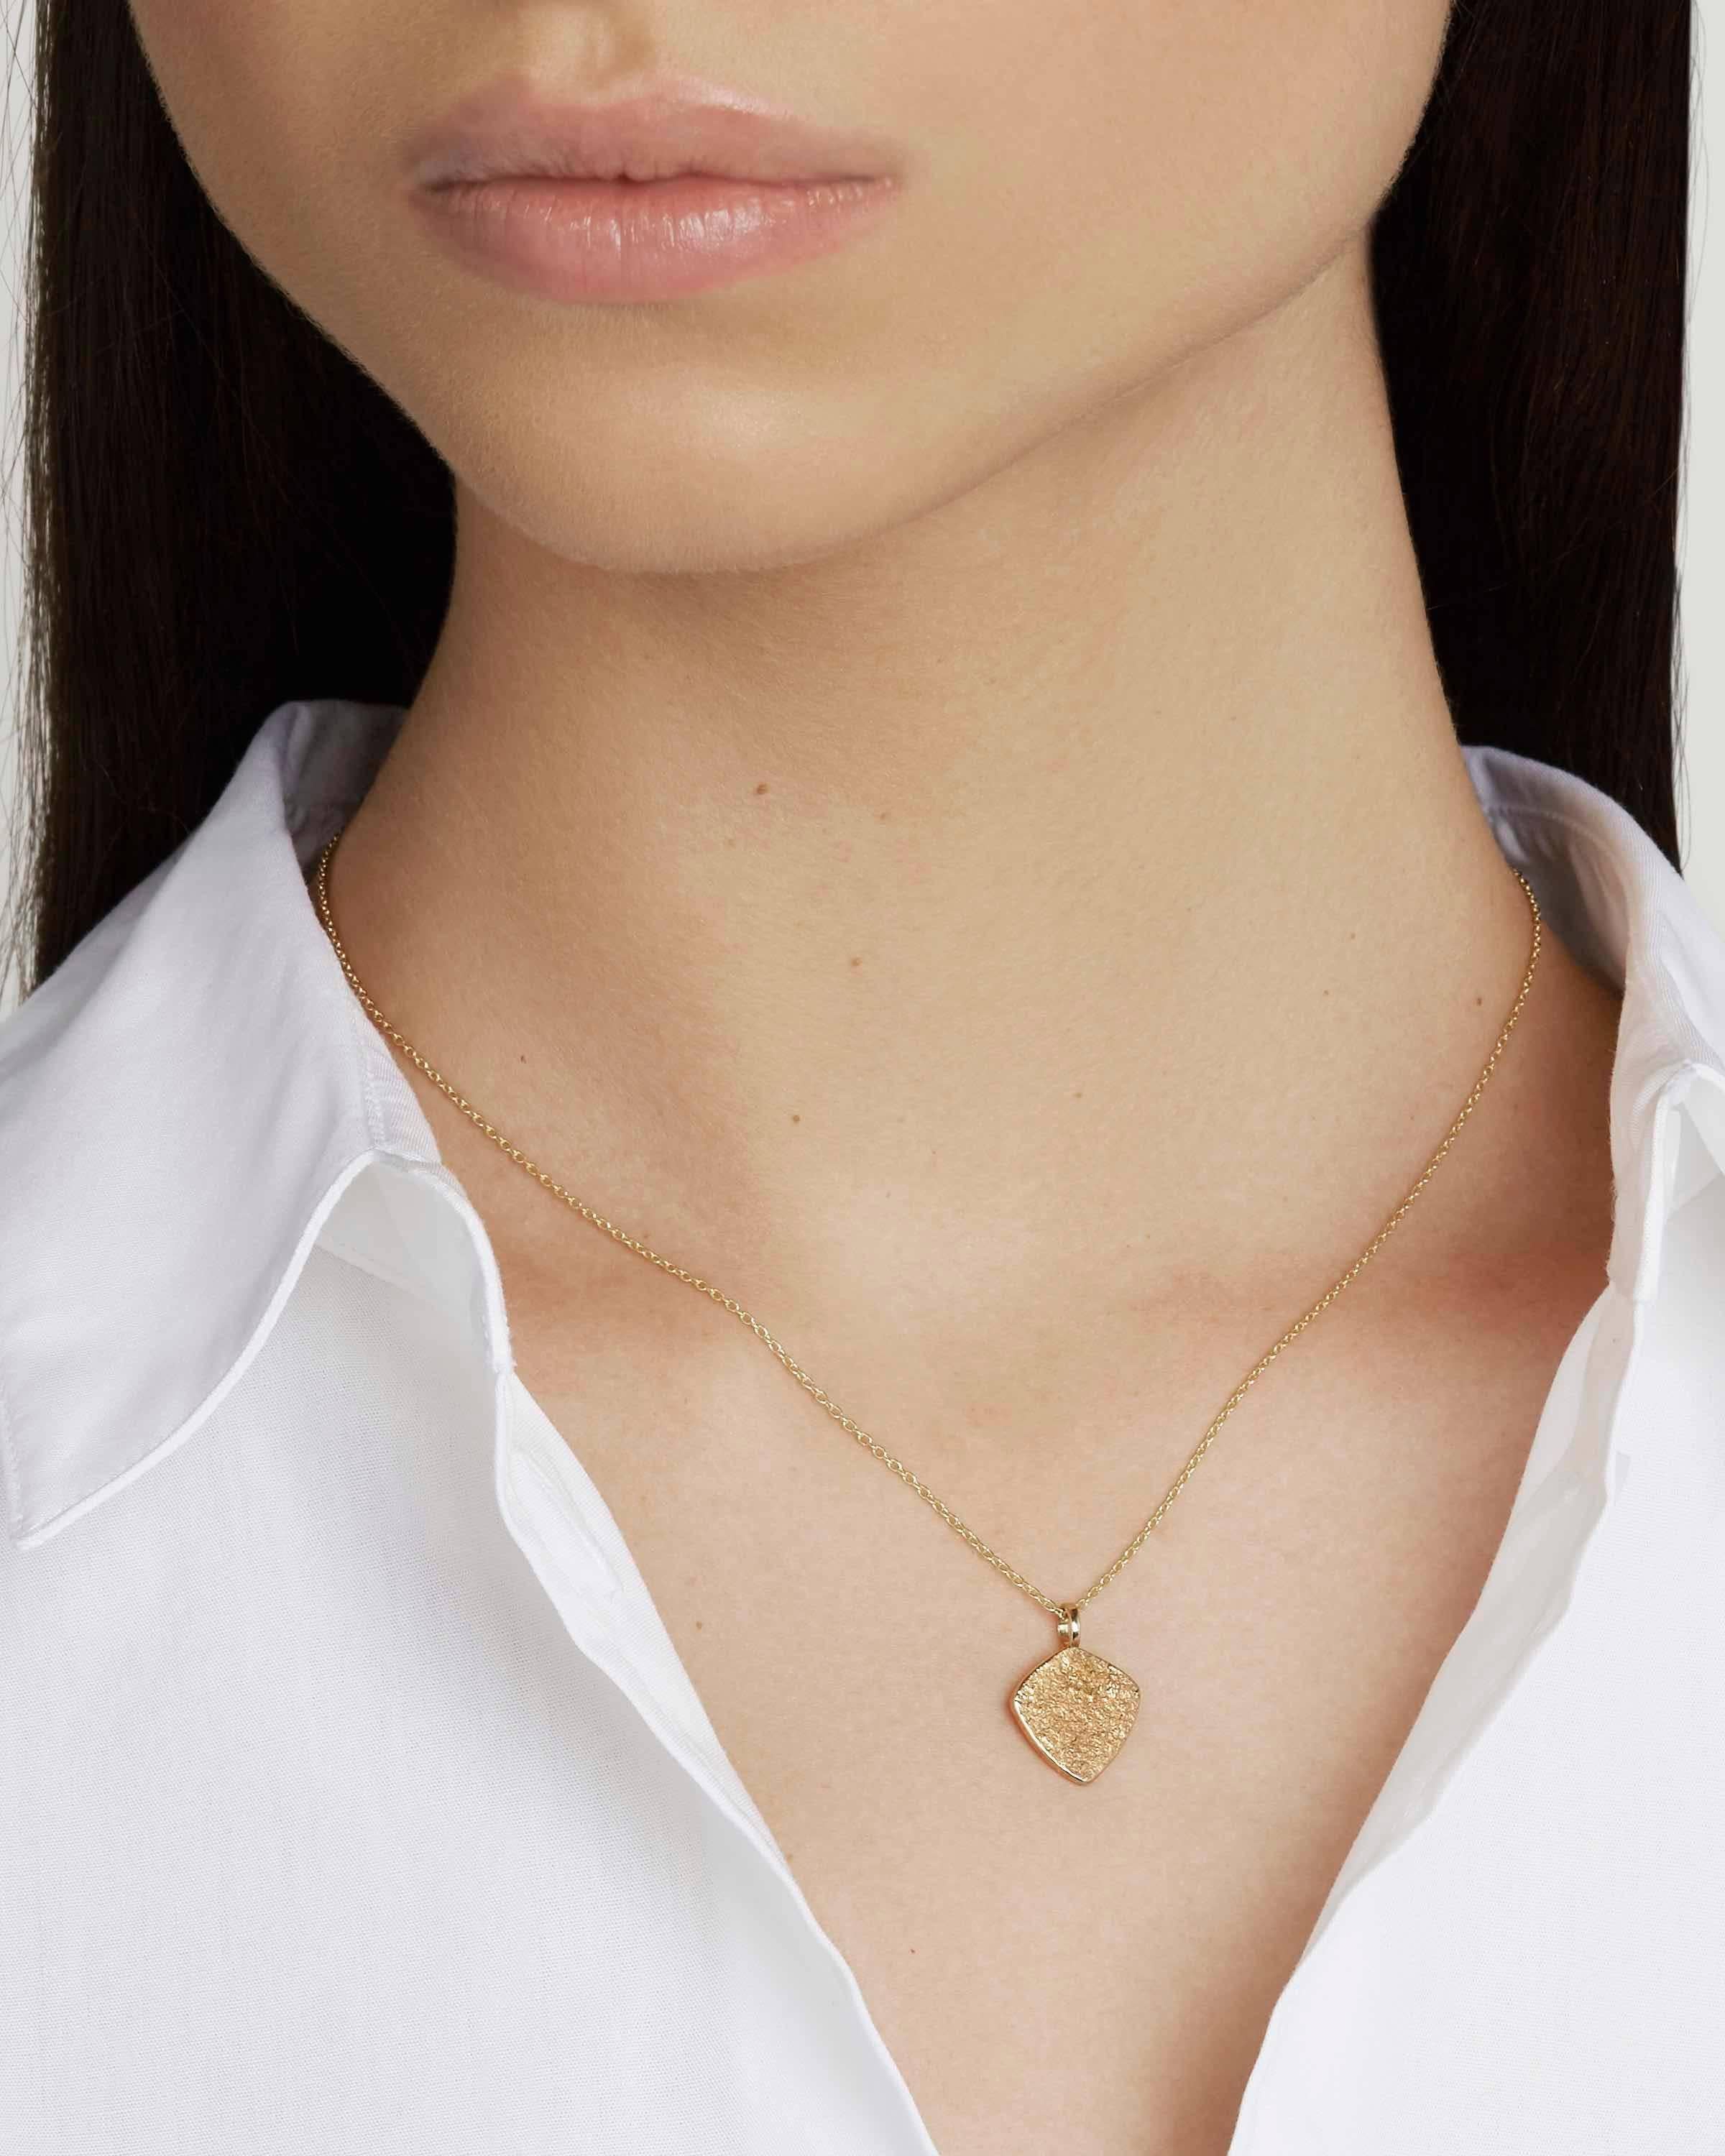 This versatile, classic pendant necklace is crafted in solid 18-carat yellow gold and features our signature Paper texture.  Perfect for layering, the pendant comes on a 18-inch chain in solid 18-carat gold.  Pendant is 1.8 mm long by 1.3 mm wide.